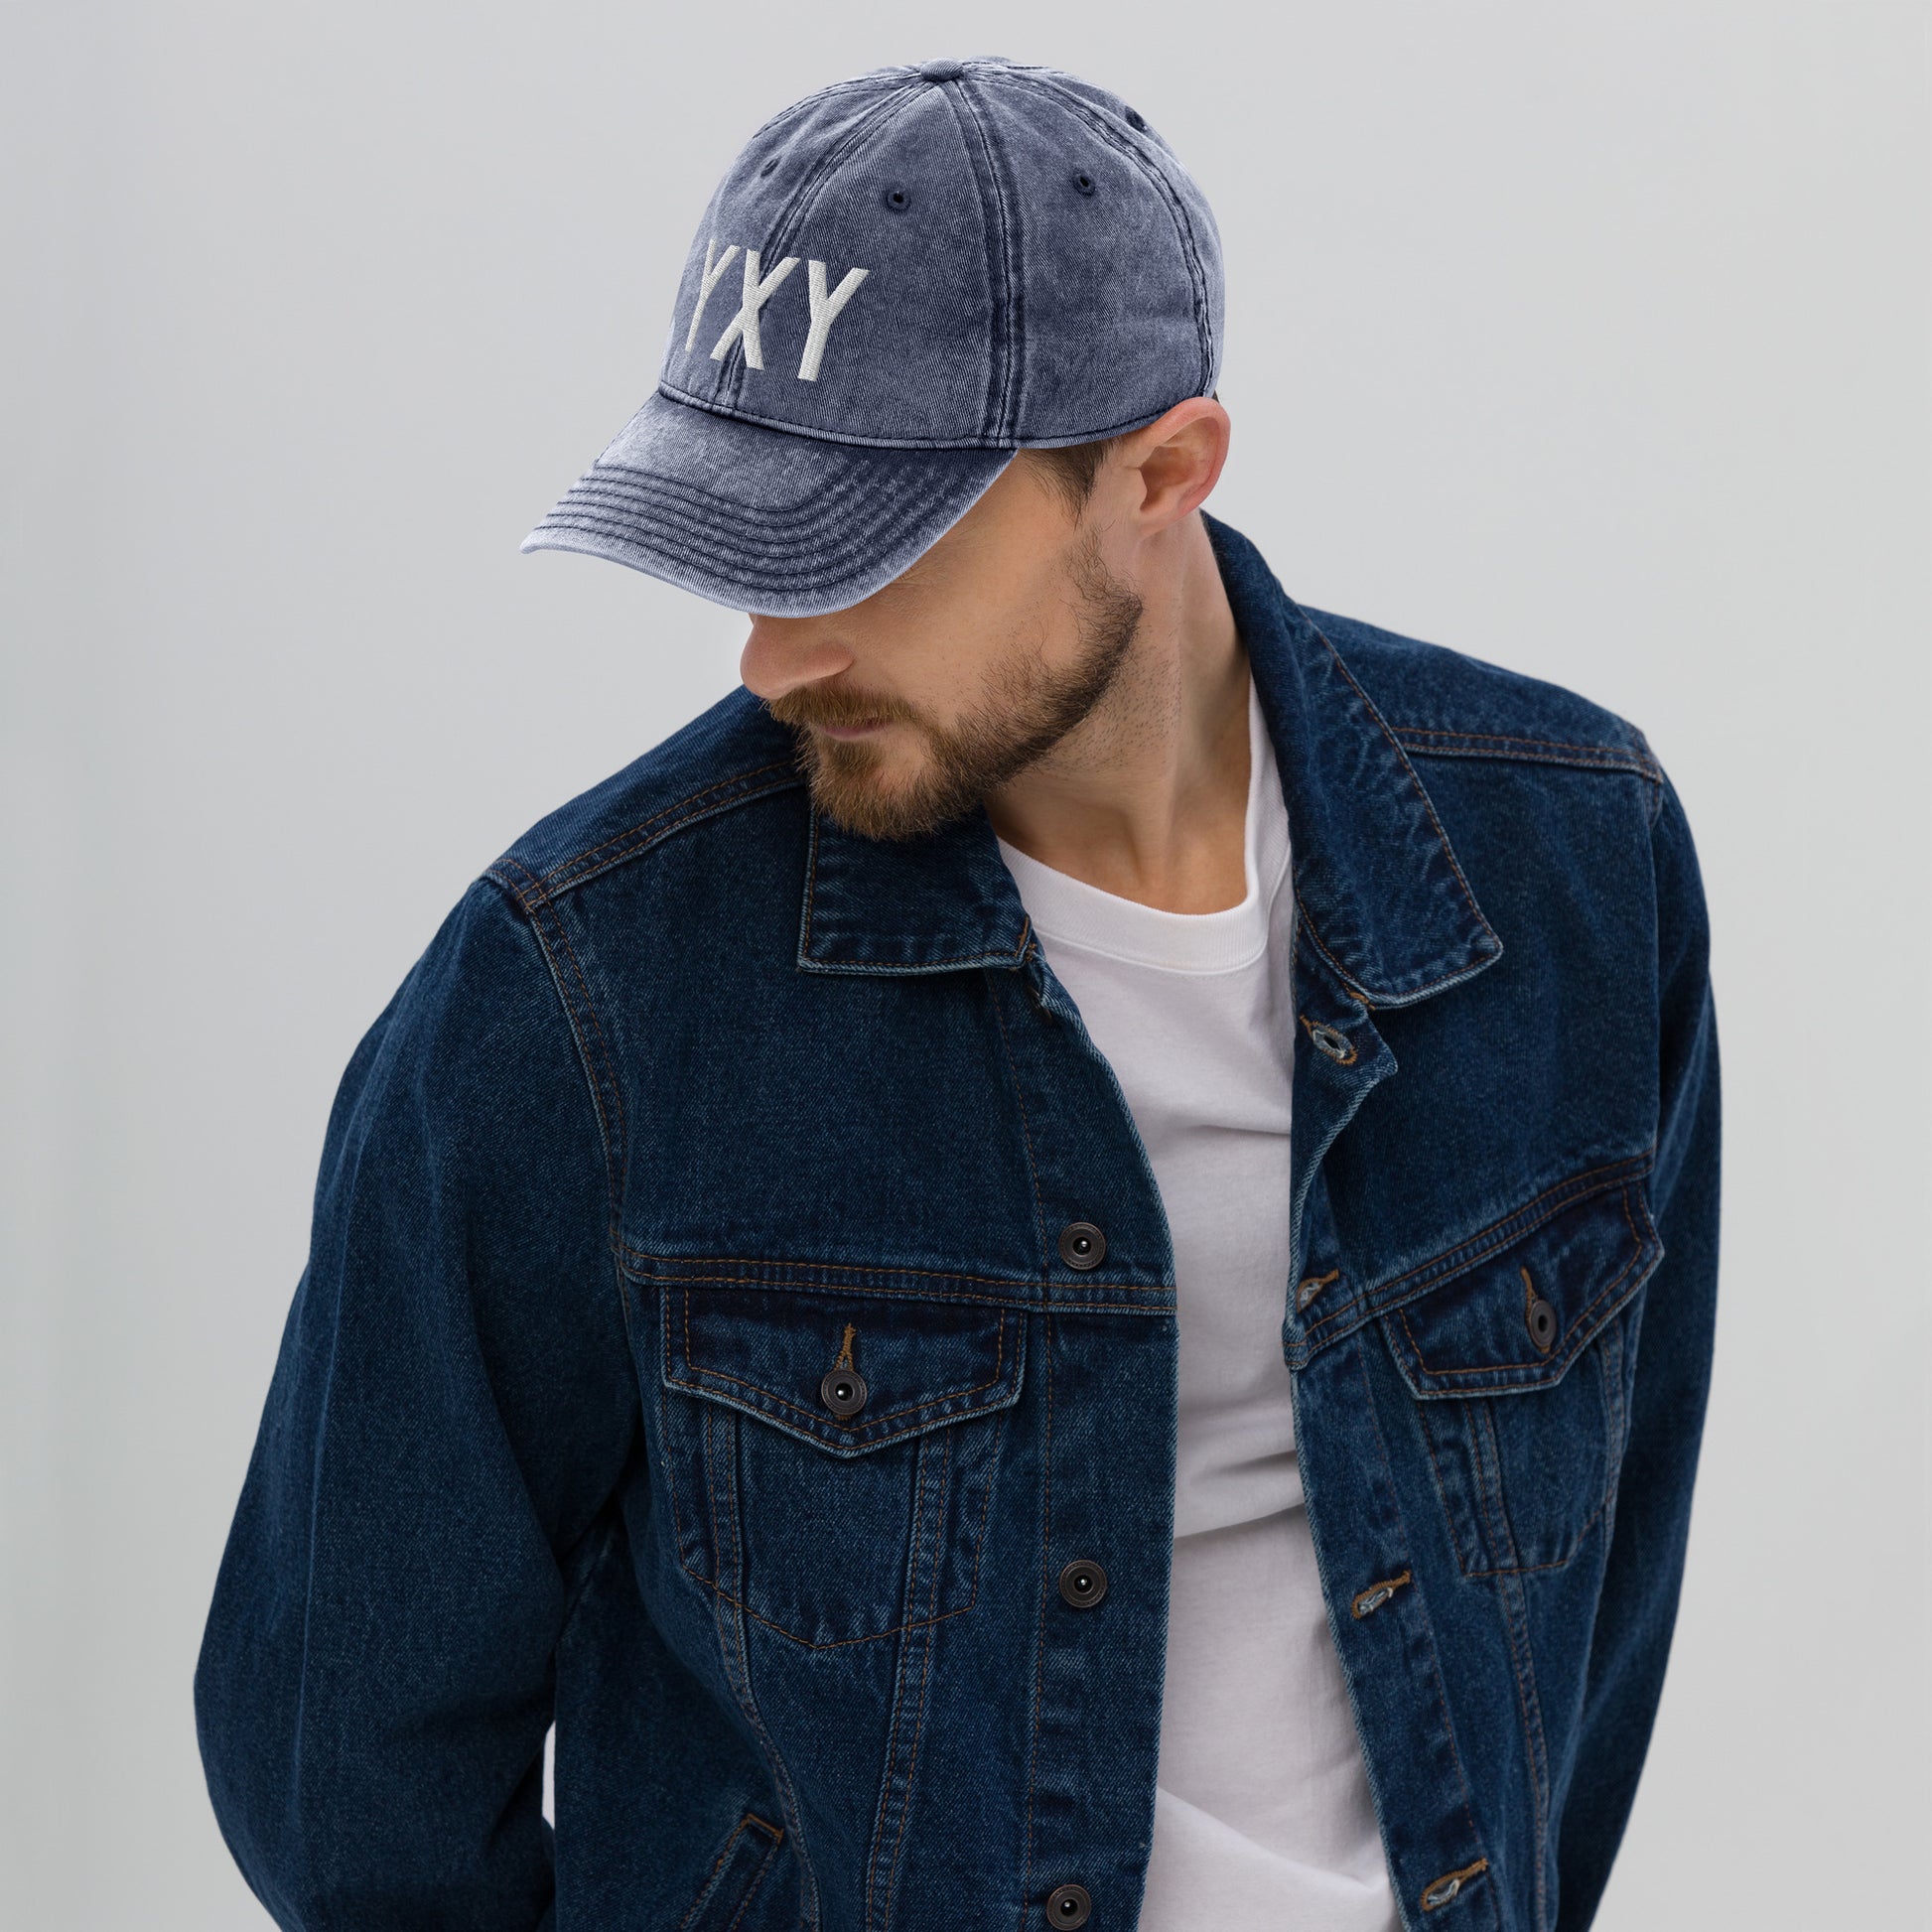 Airport Code Twill Cap - White • YXY Whitehorse • YHM Designs - Image 04